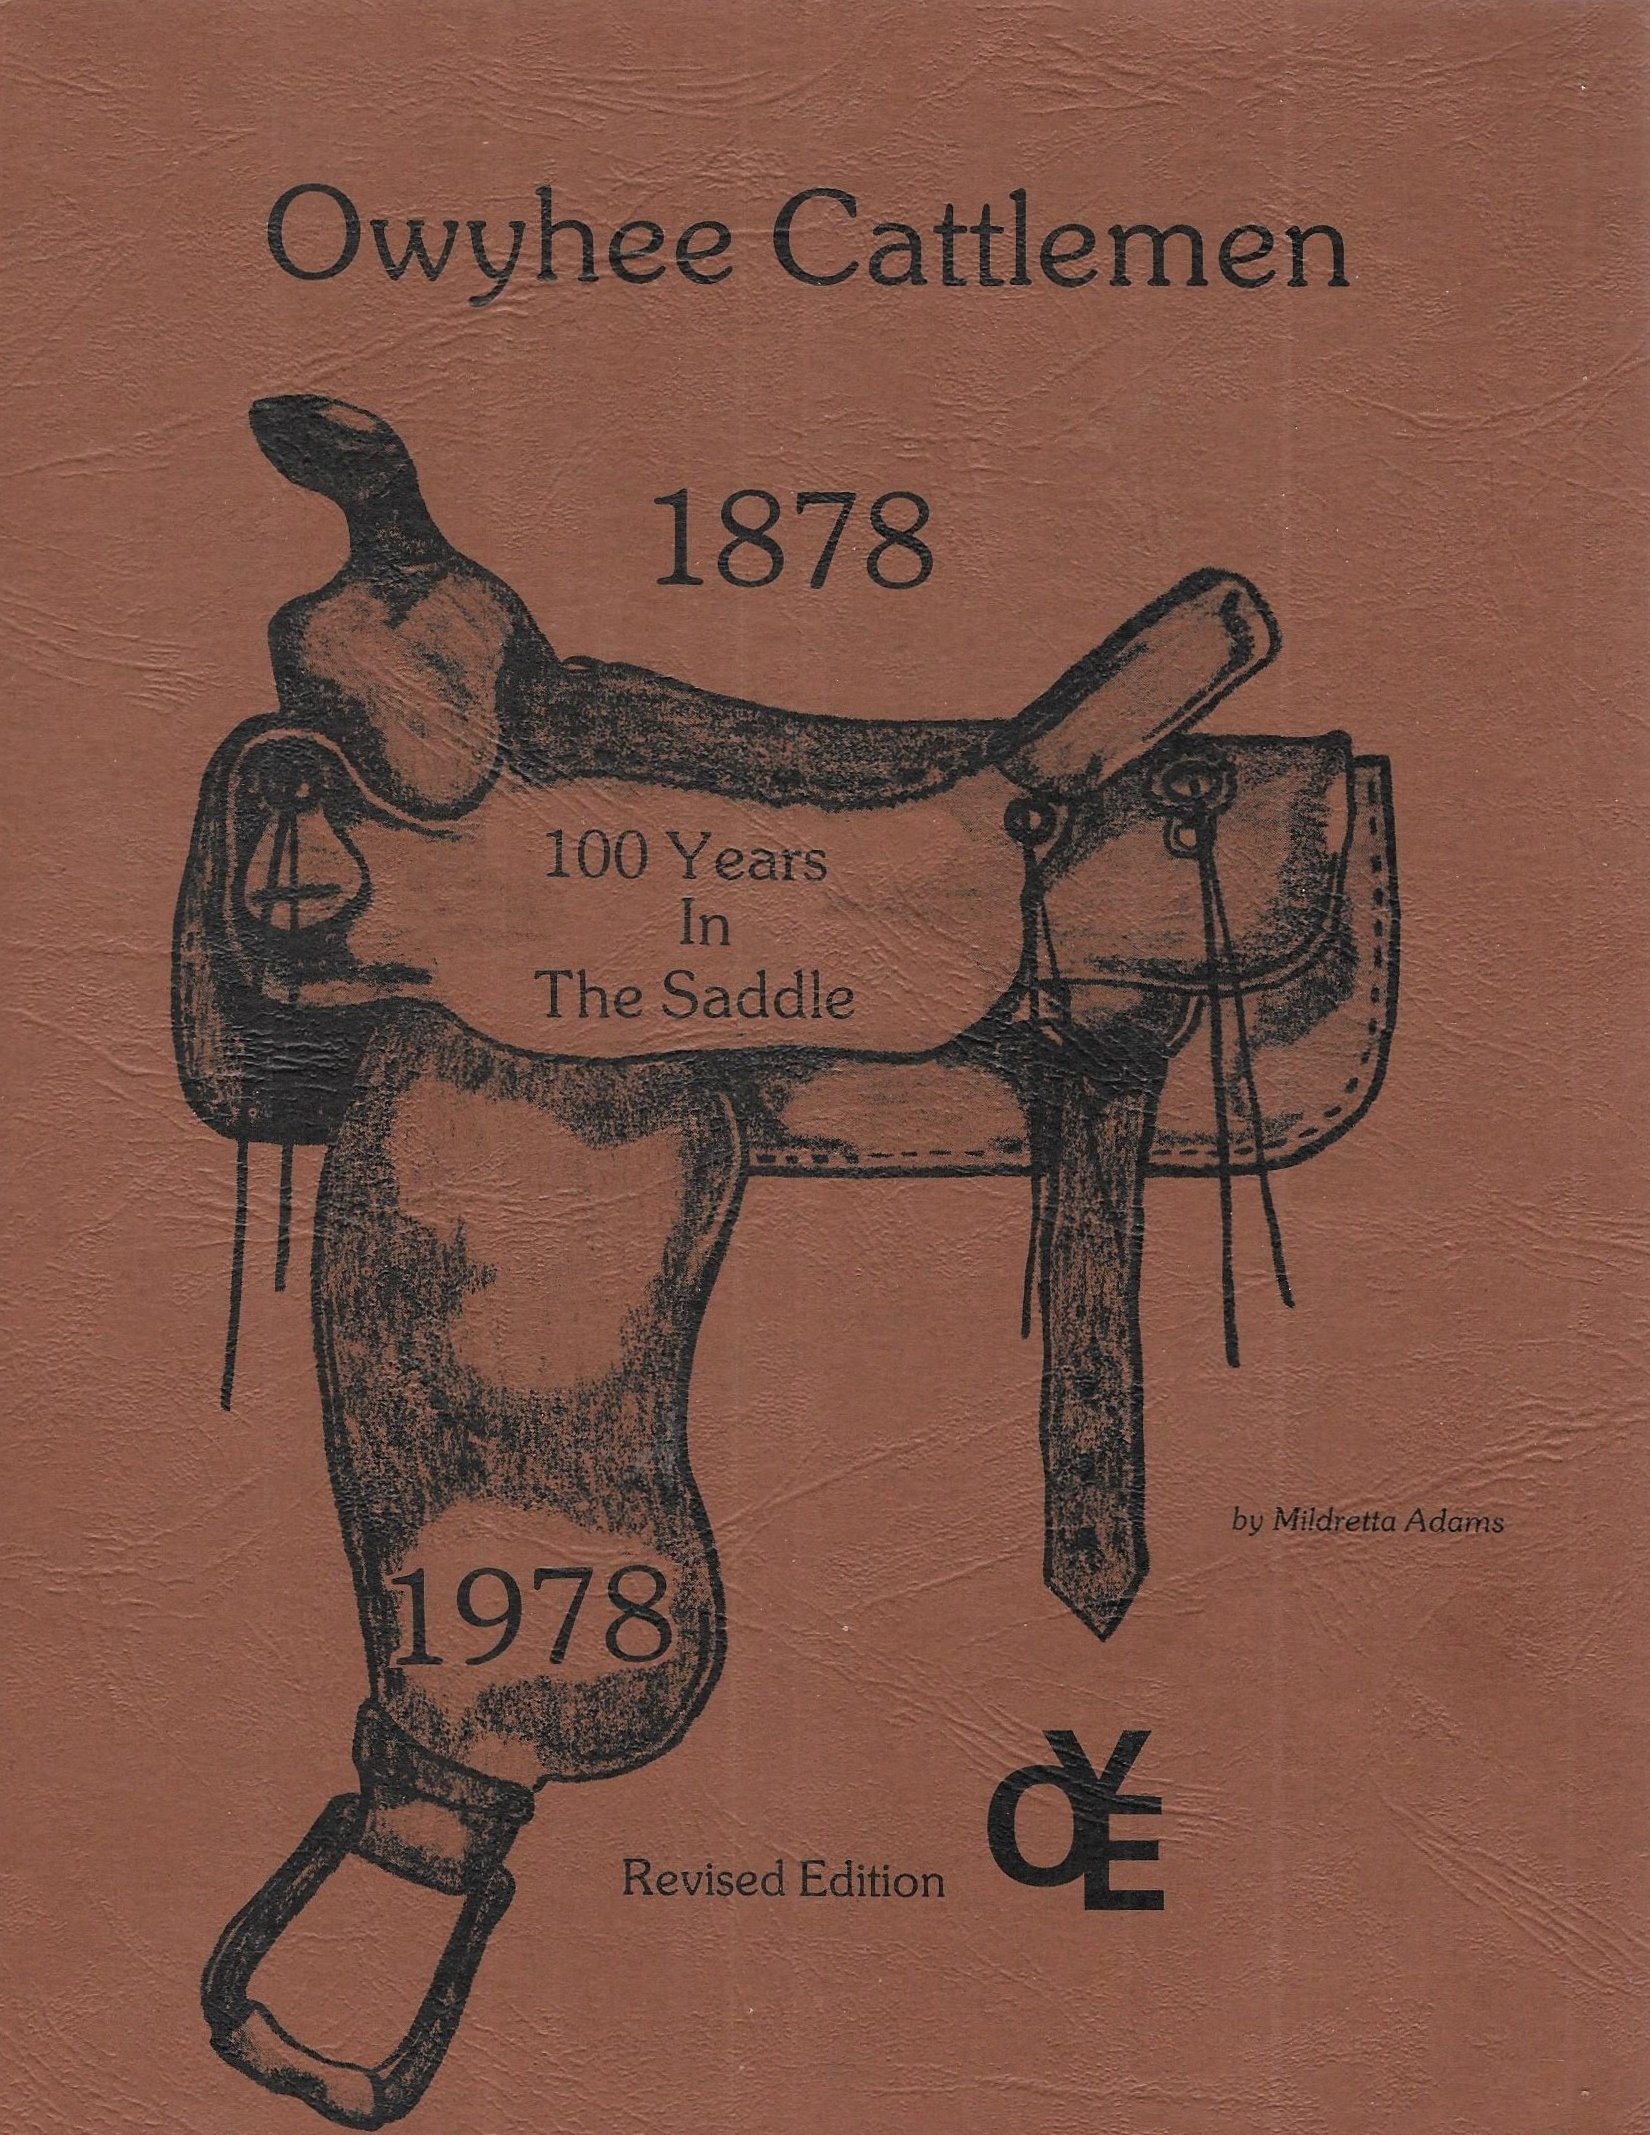 Owyhee cattlemen, 1878-1978: 100 years in the saddle (book cover)